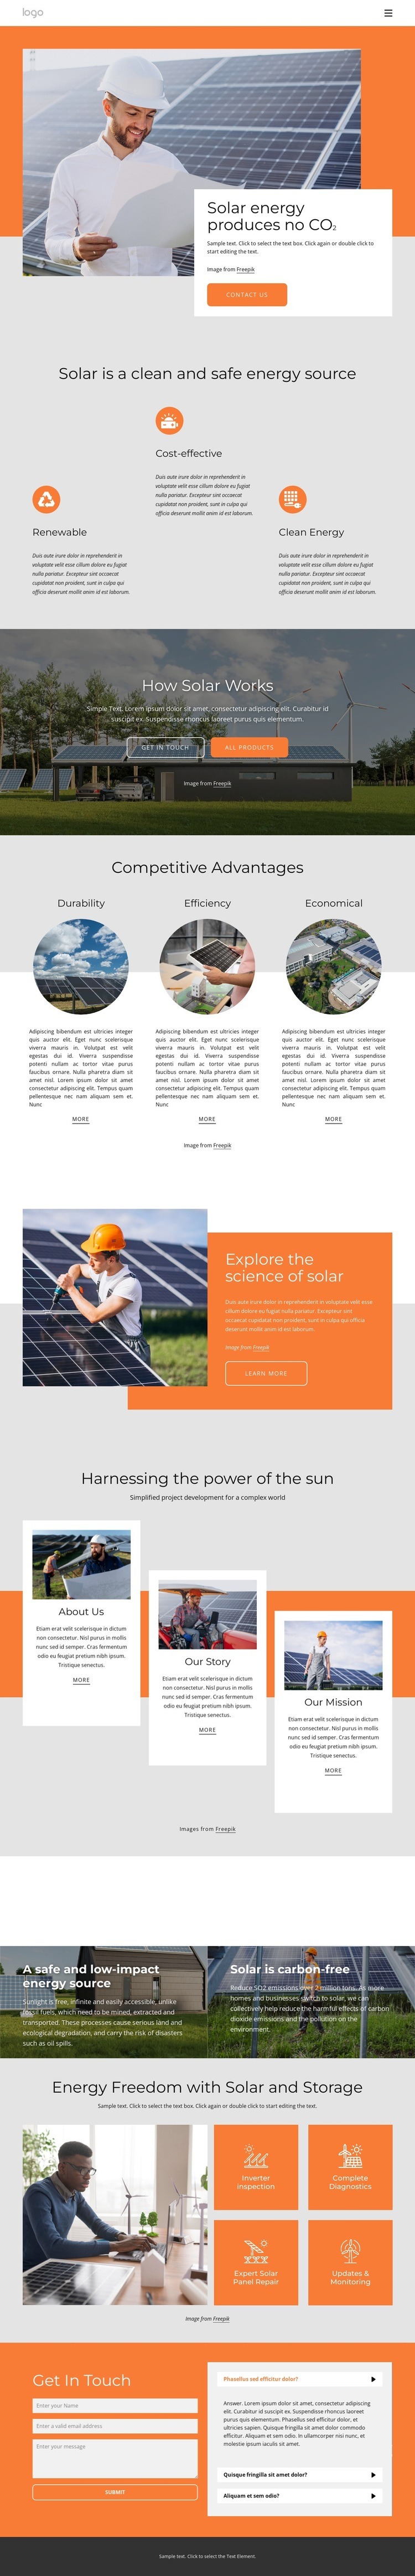 Power your home with clean solar energy Elementor Template Alternative